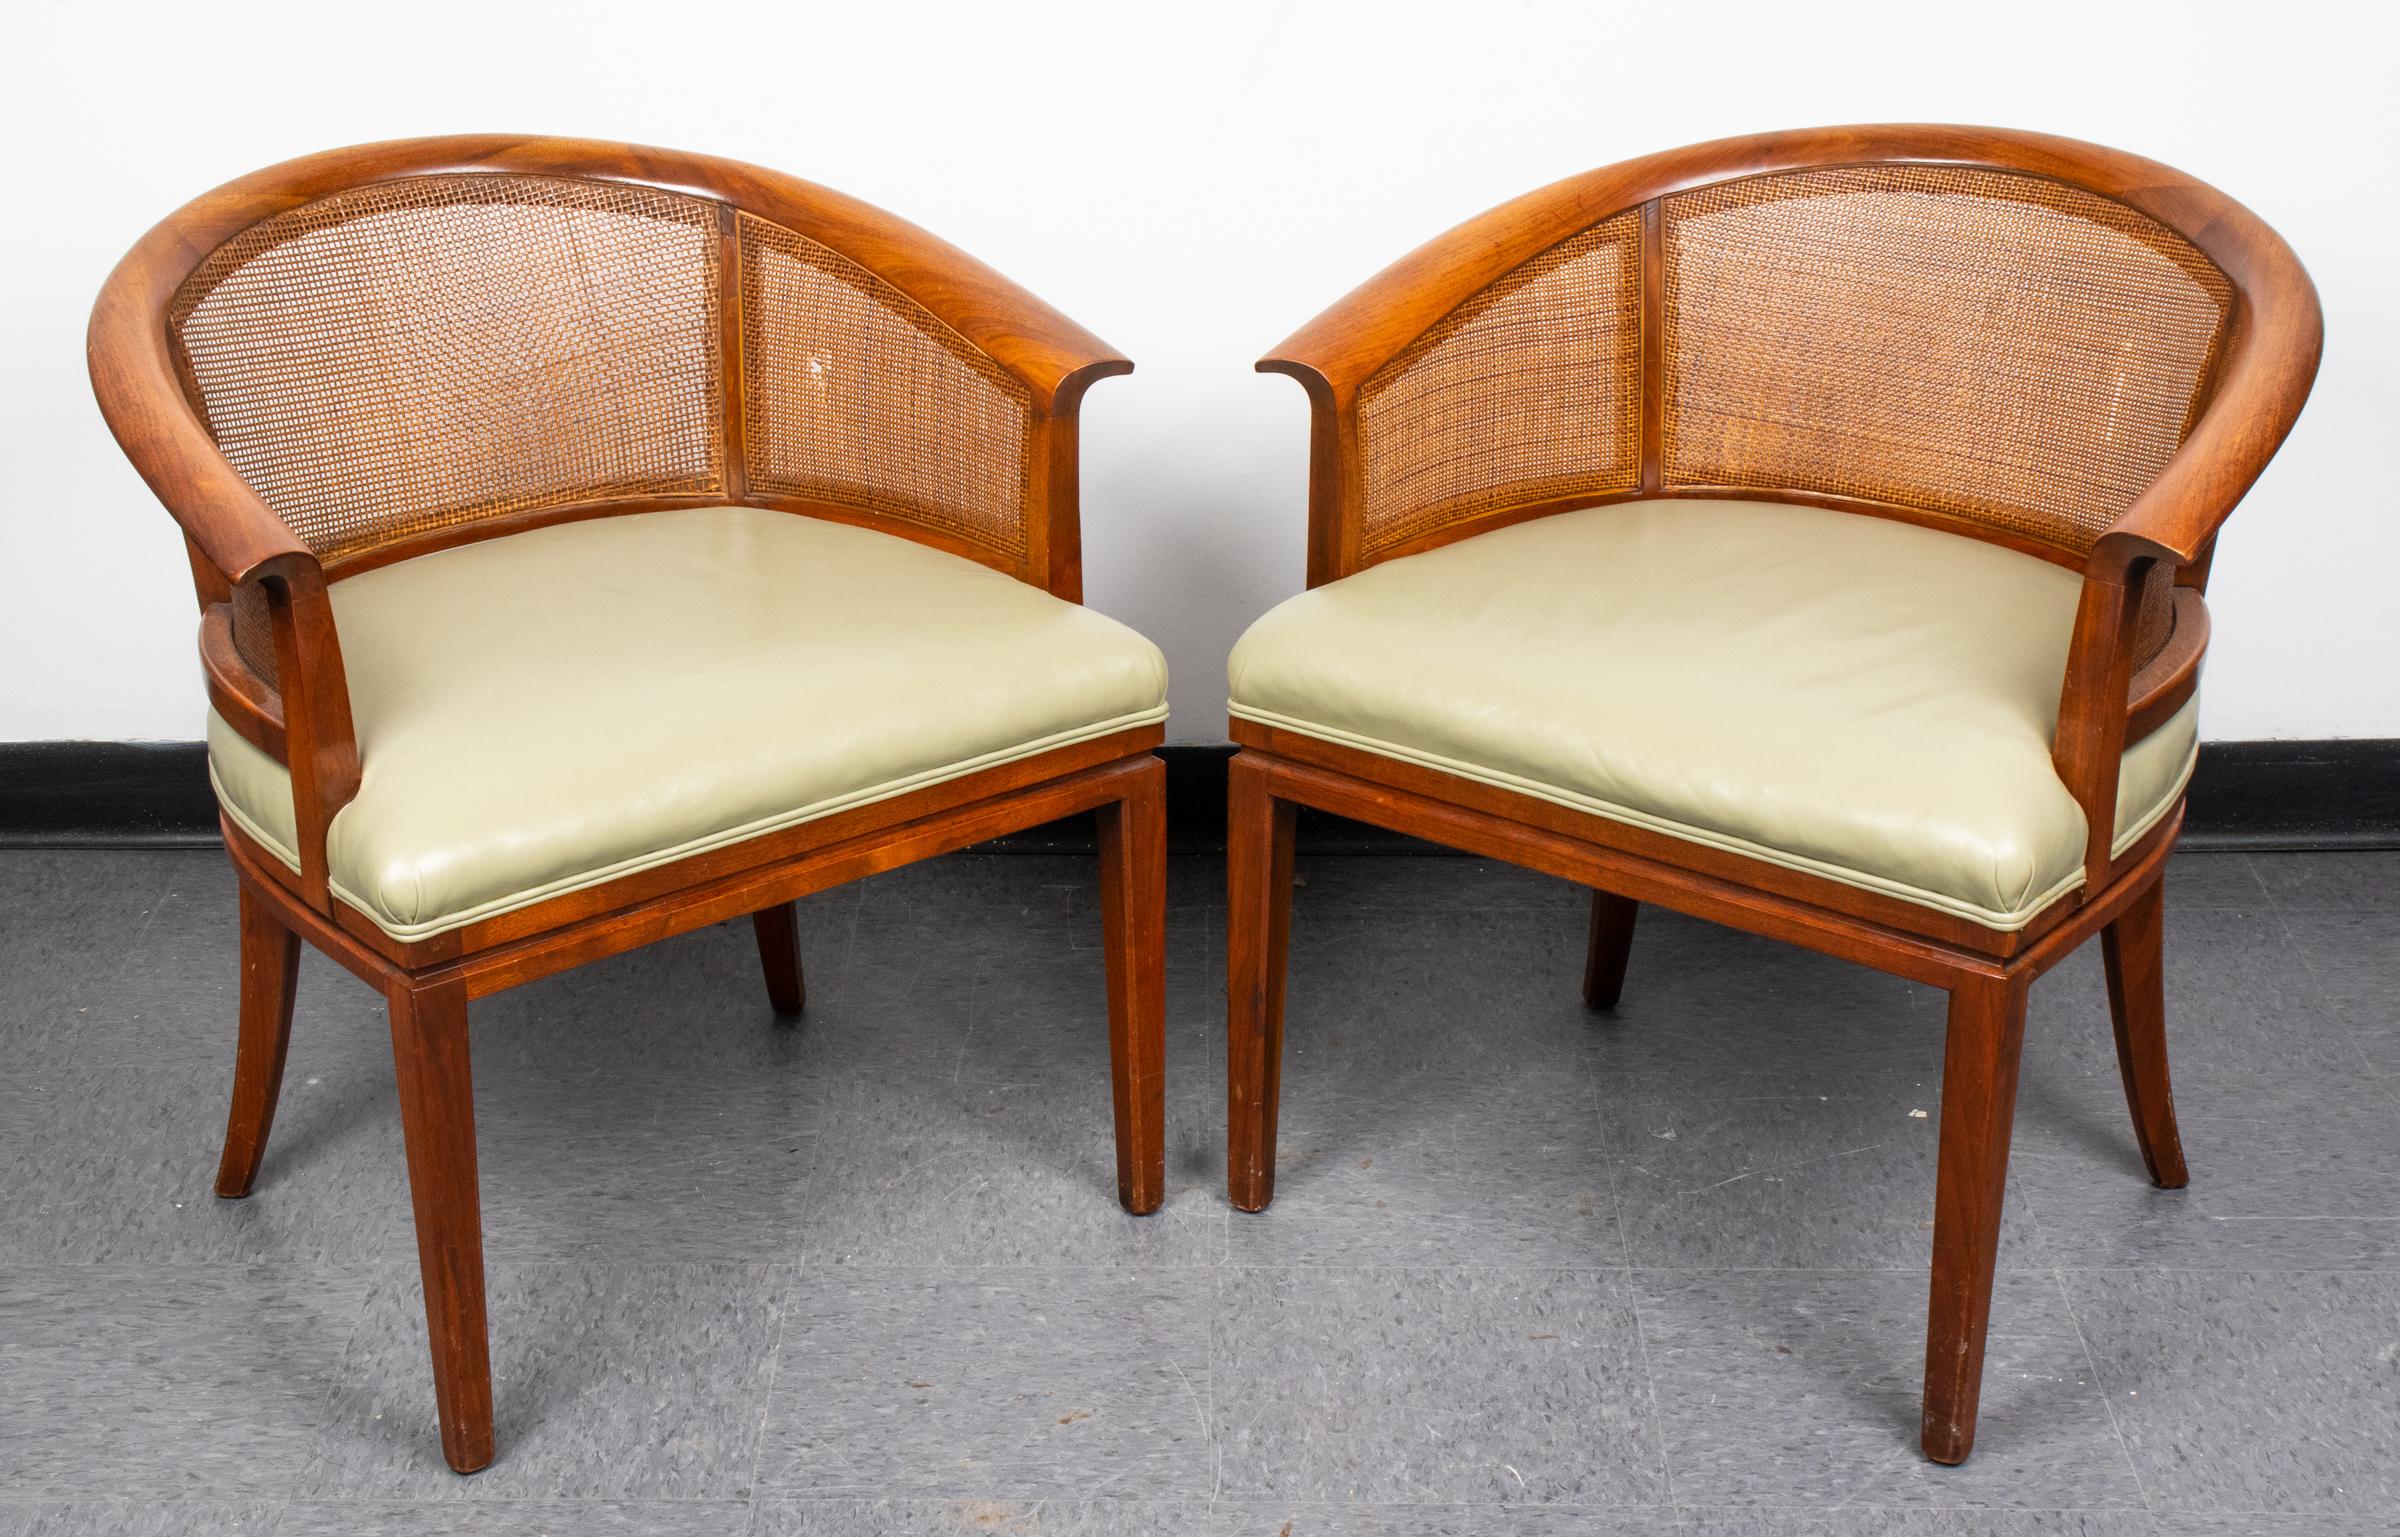 Pair of Edward Wormley style Mid-Century Modern armchairs with caned barrel backs, upholstered cushions. Measures: 29